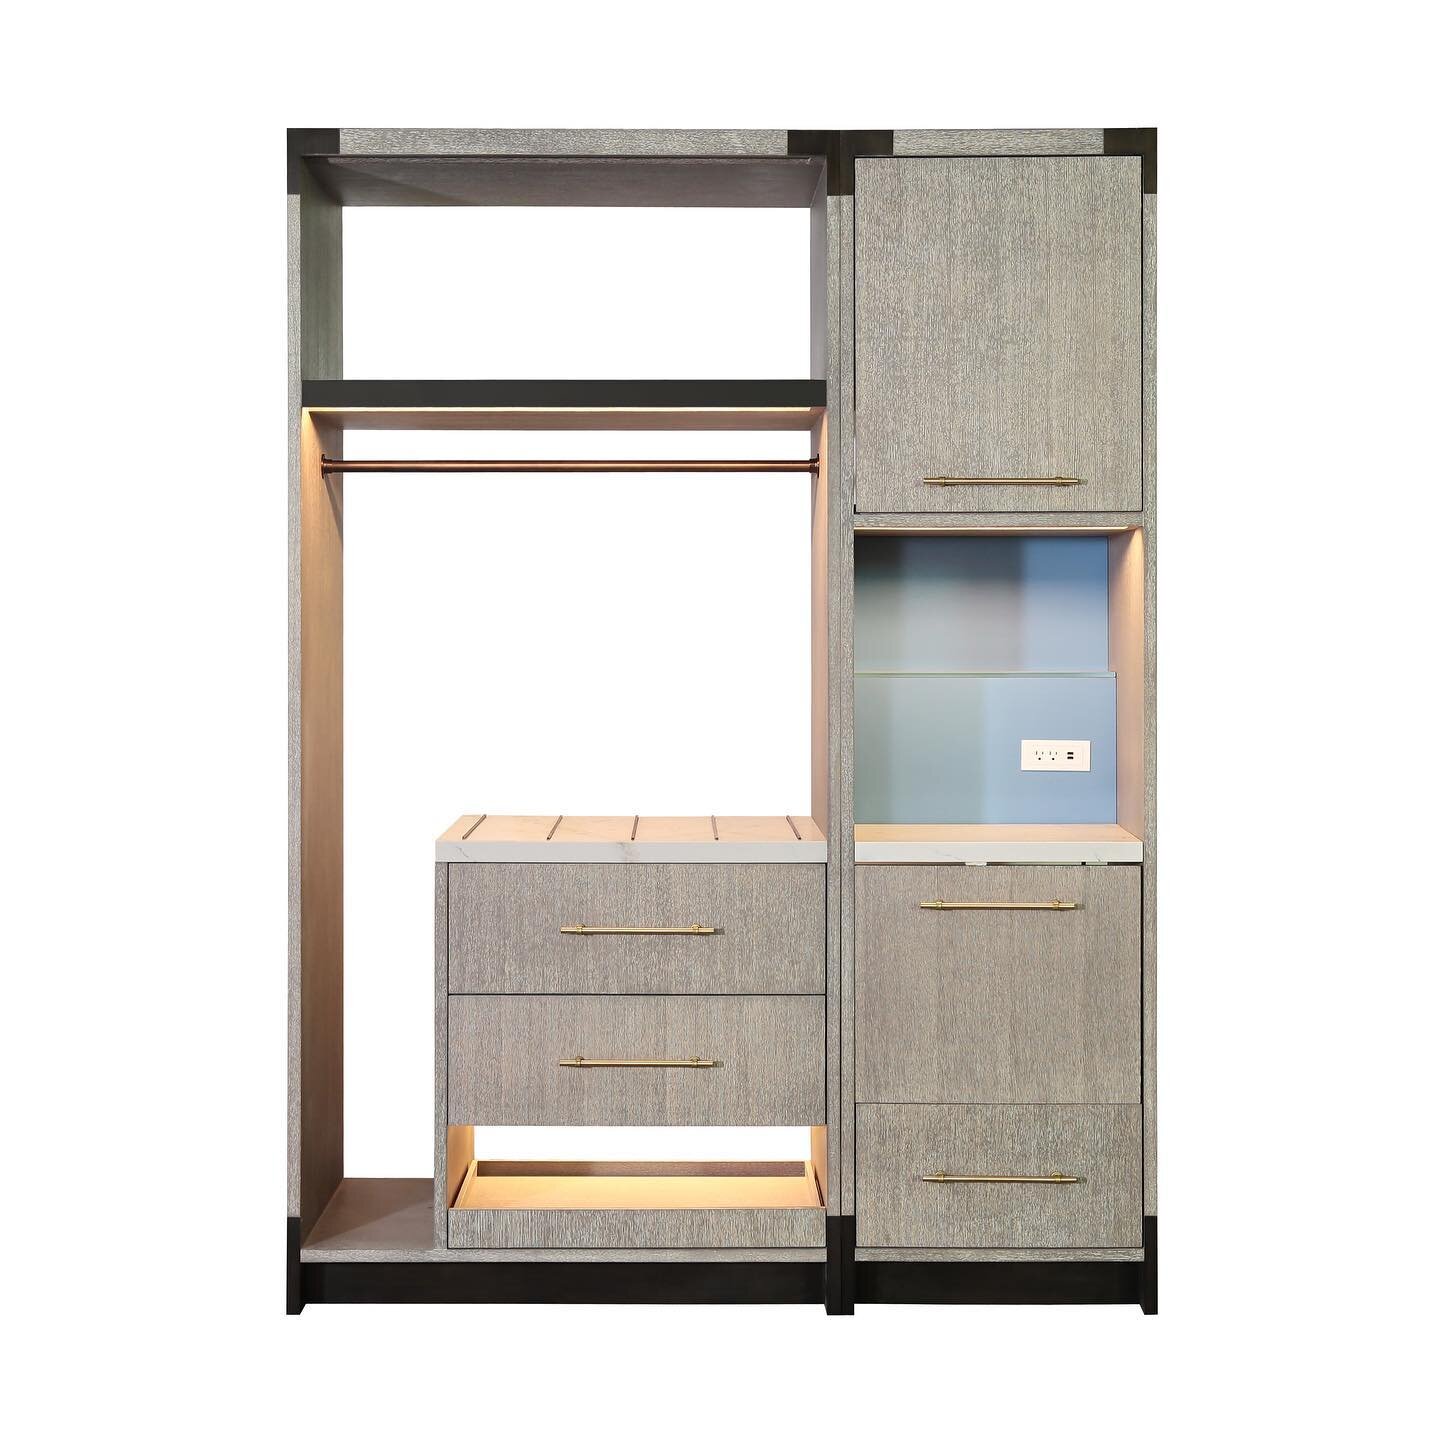 Multi-Functional ~ 
A luggage holder, closet, and bar unit in one! Compact, minimal and complete with the perfect finishes for an effortlessly sleek and functional design.
&nbsp;
You can explore some of our standard finish collections here: https://w